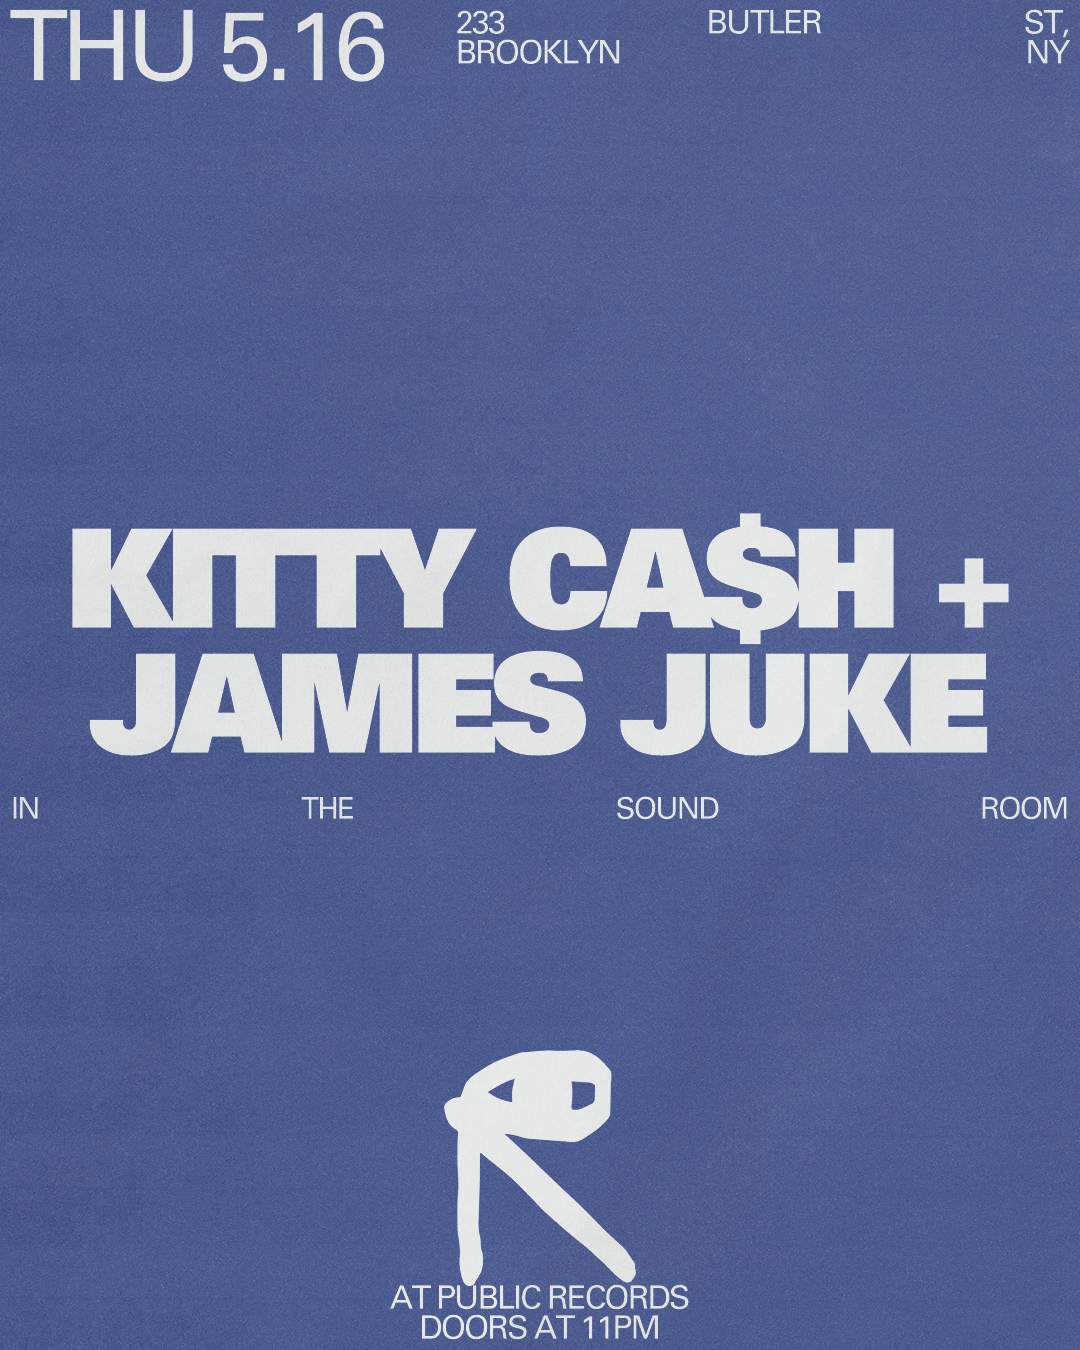 Kitty Ca$h Album Release Party with James Juke - フライヤー表